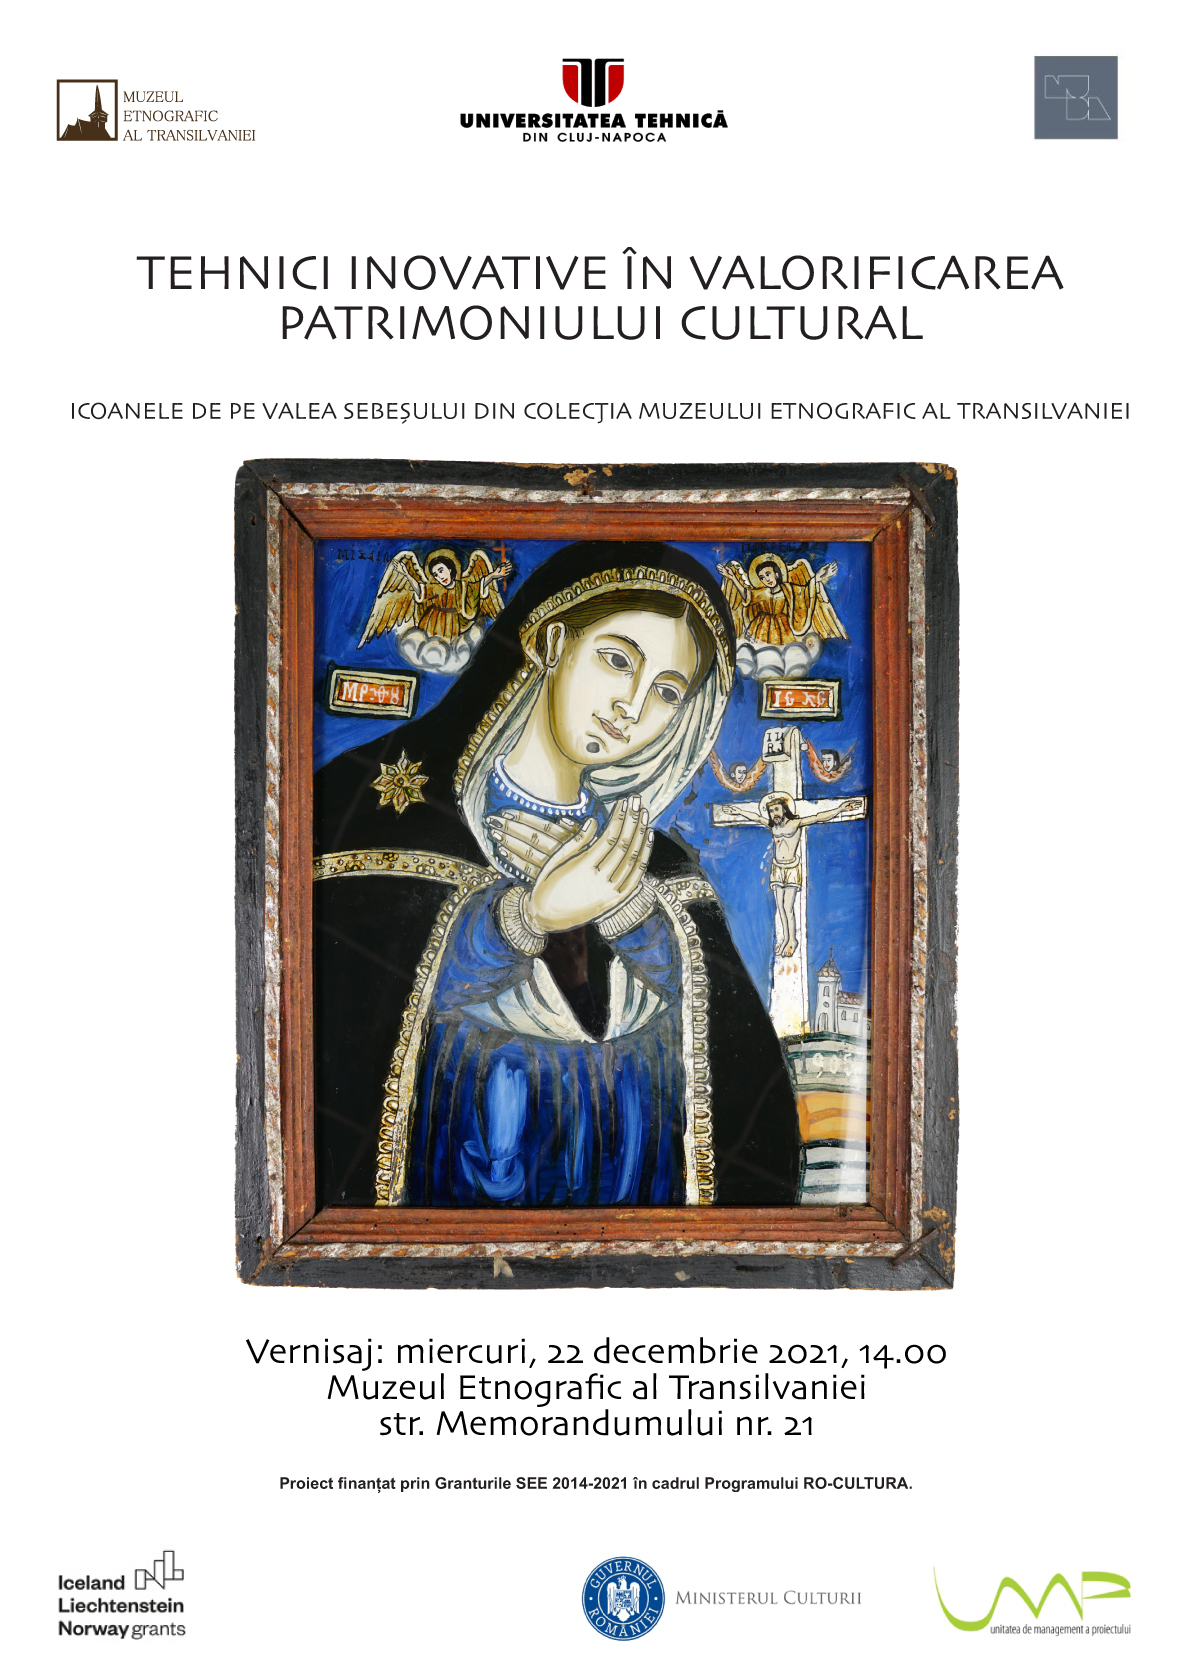 Icons on Sebeș Valley in an innovative exhibition